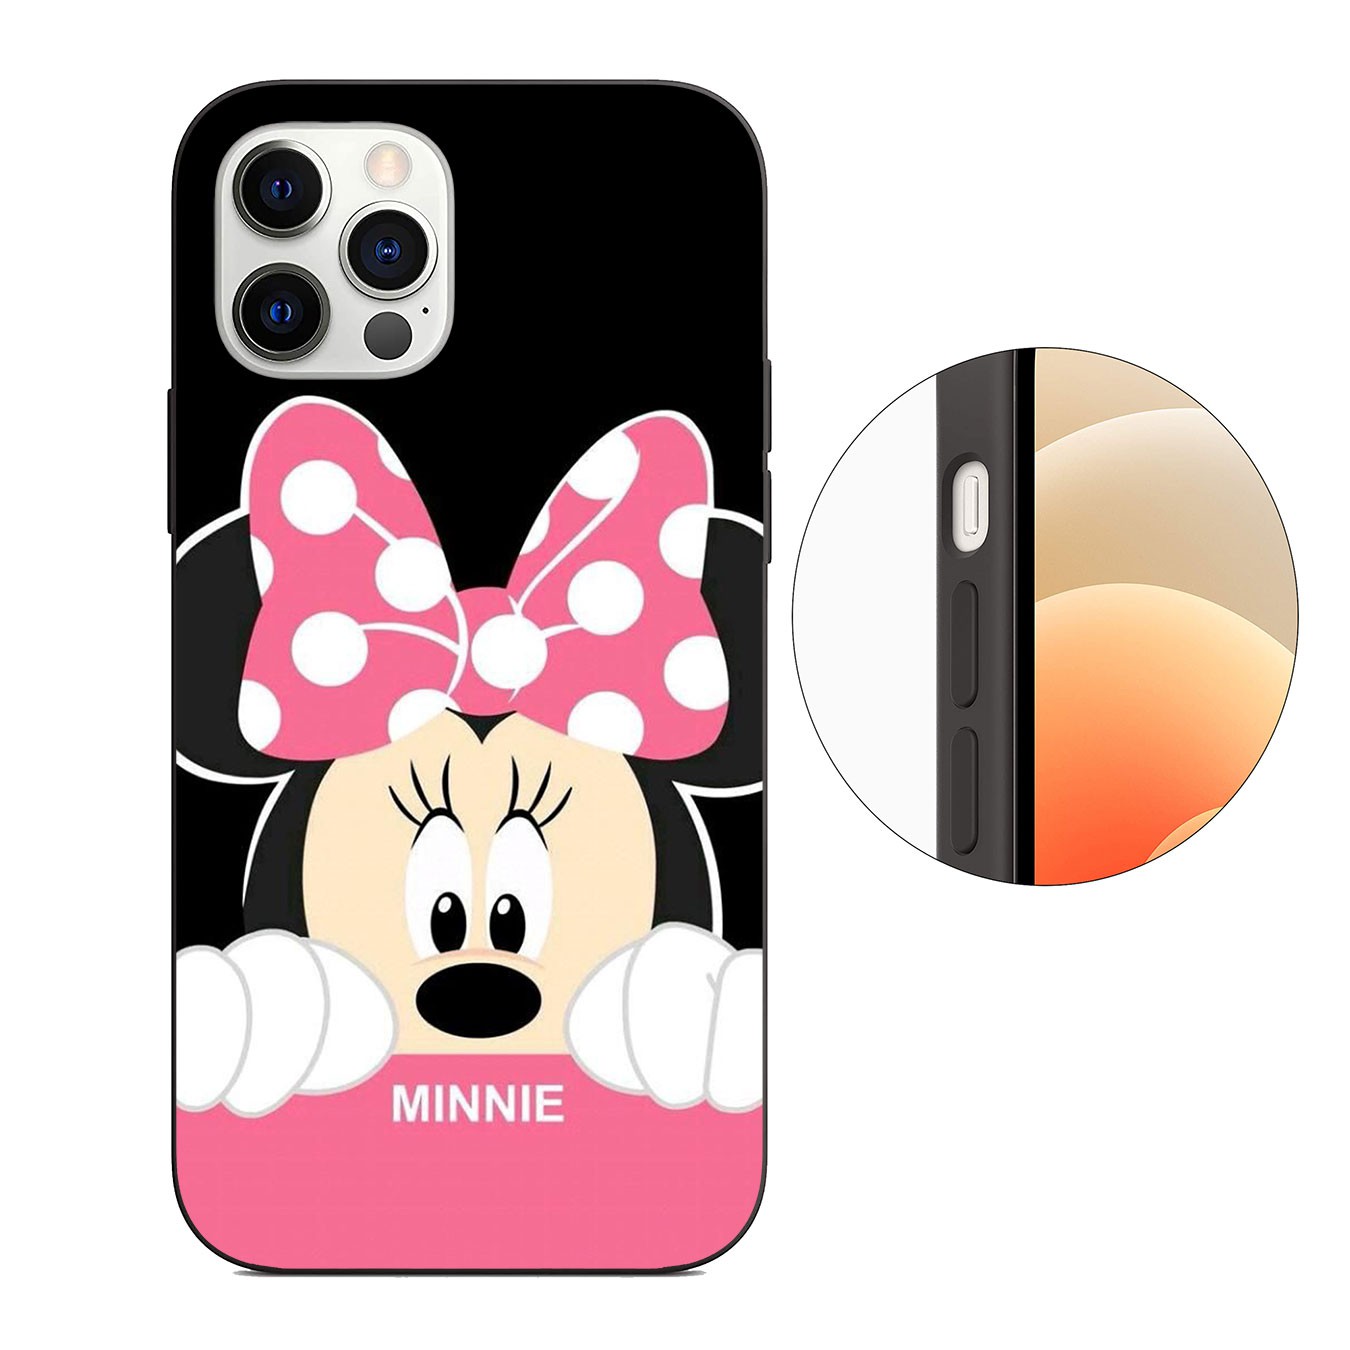 Samsung Galaxy S9 S10 S20 FE Ultra Plus Lite S20+ S9+ S10+ S20Plus Casing Soft Silicone Phone Case Cartoon Mickey Mouse Cover